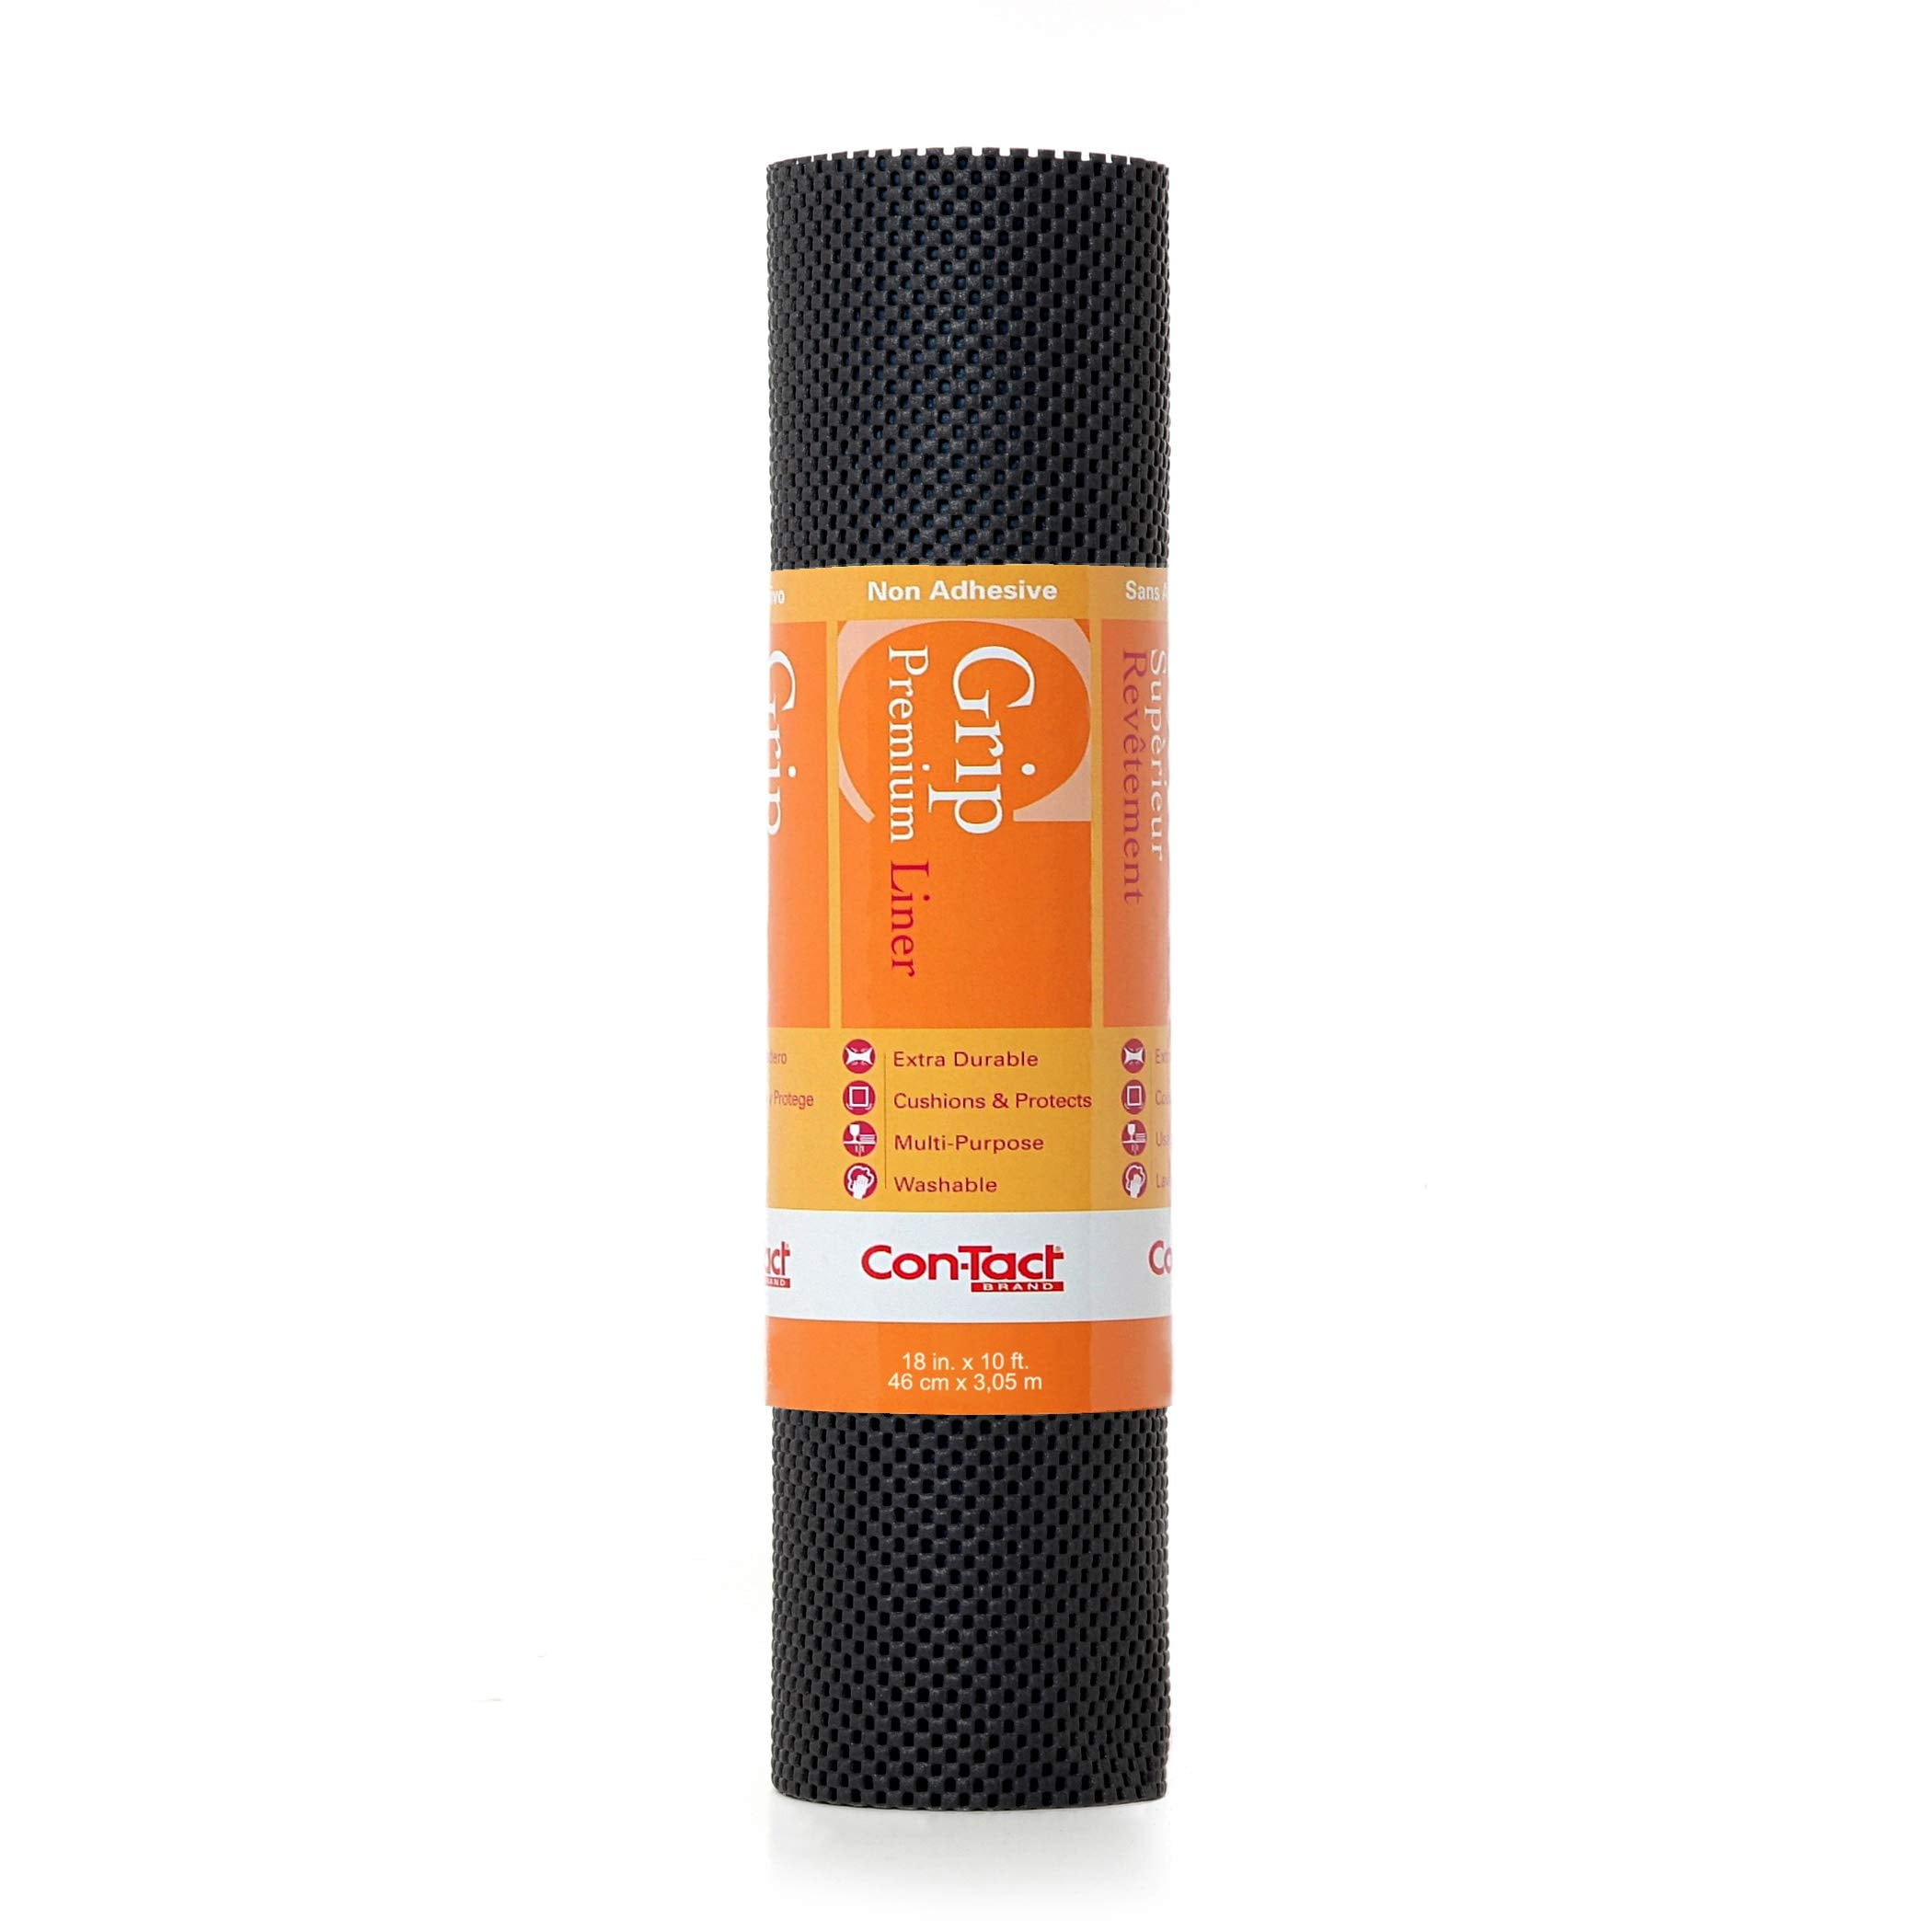  Con-Tact Brand Grip Premium Shelf Liner, Thick and Non